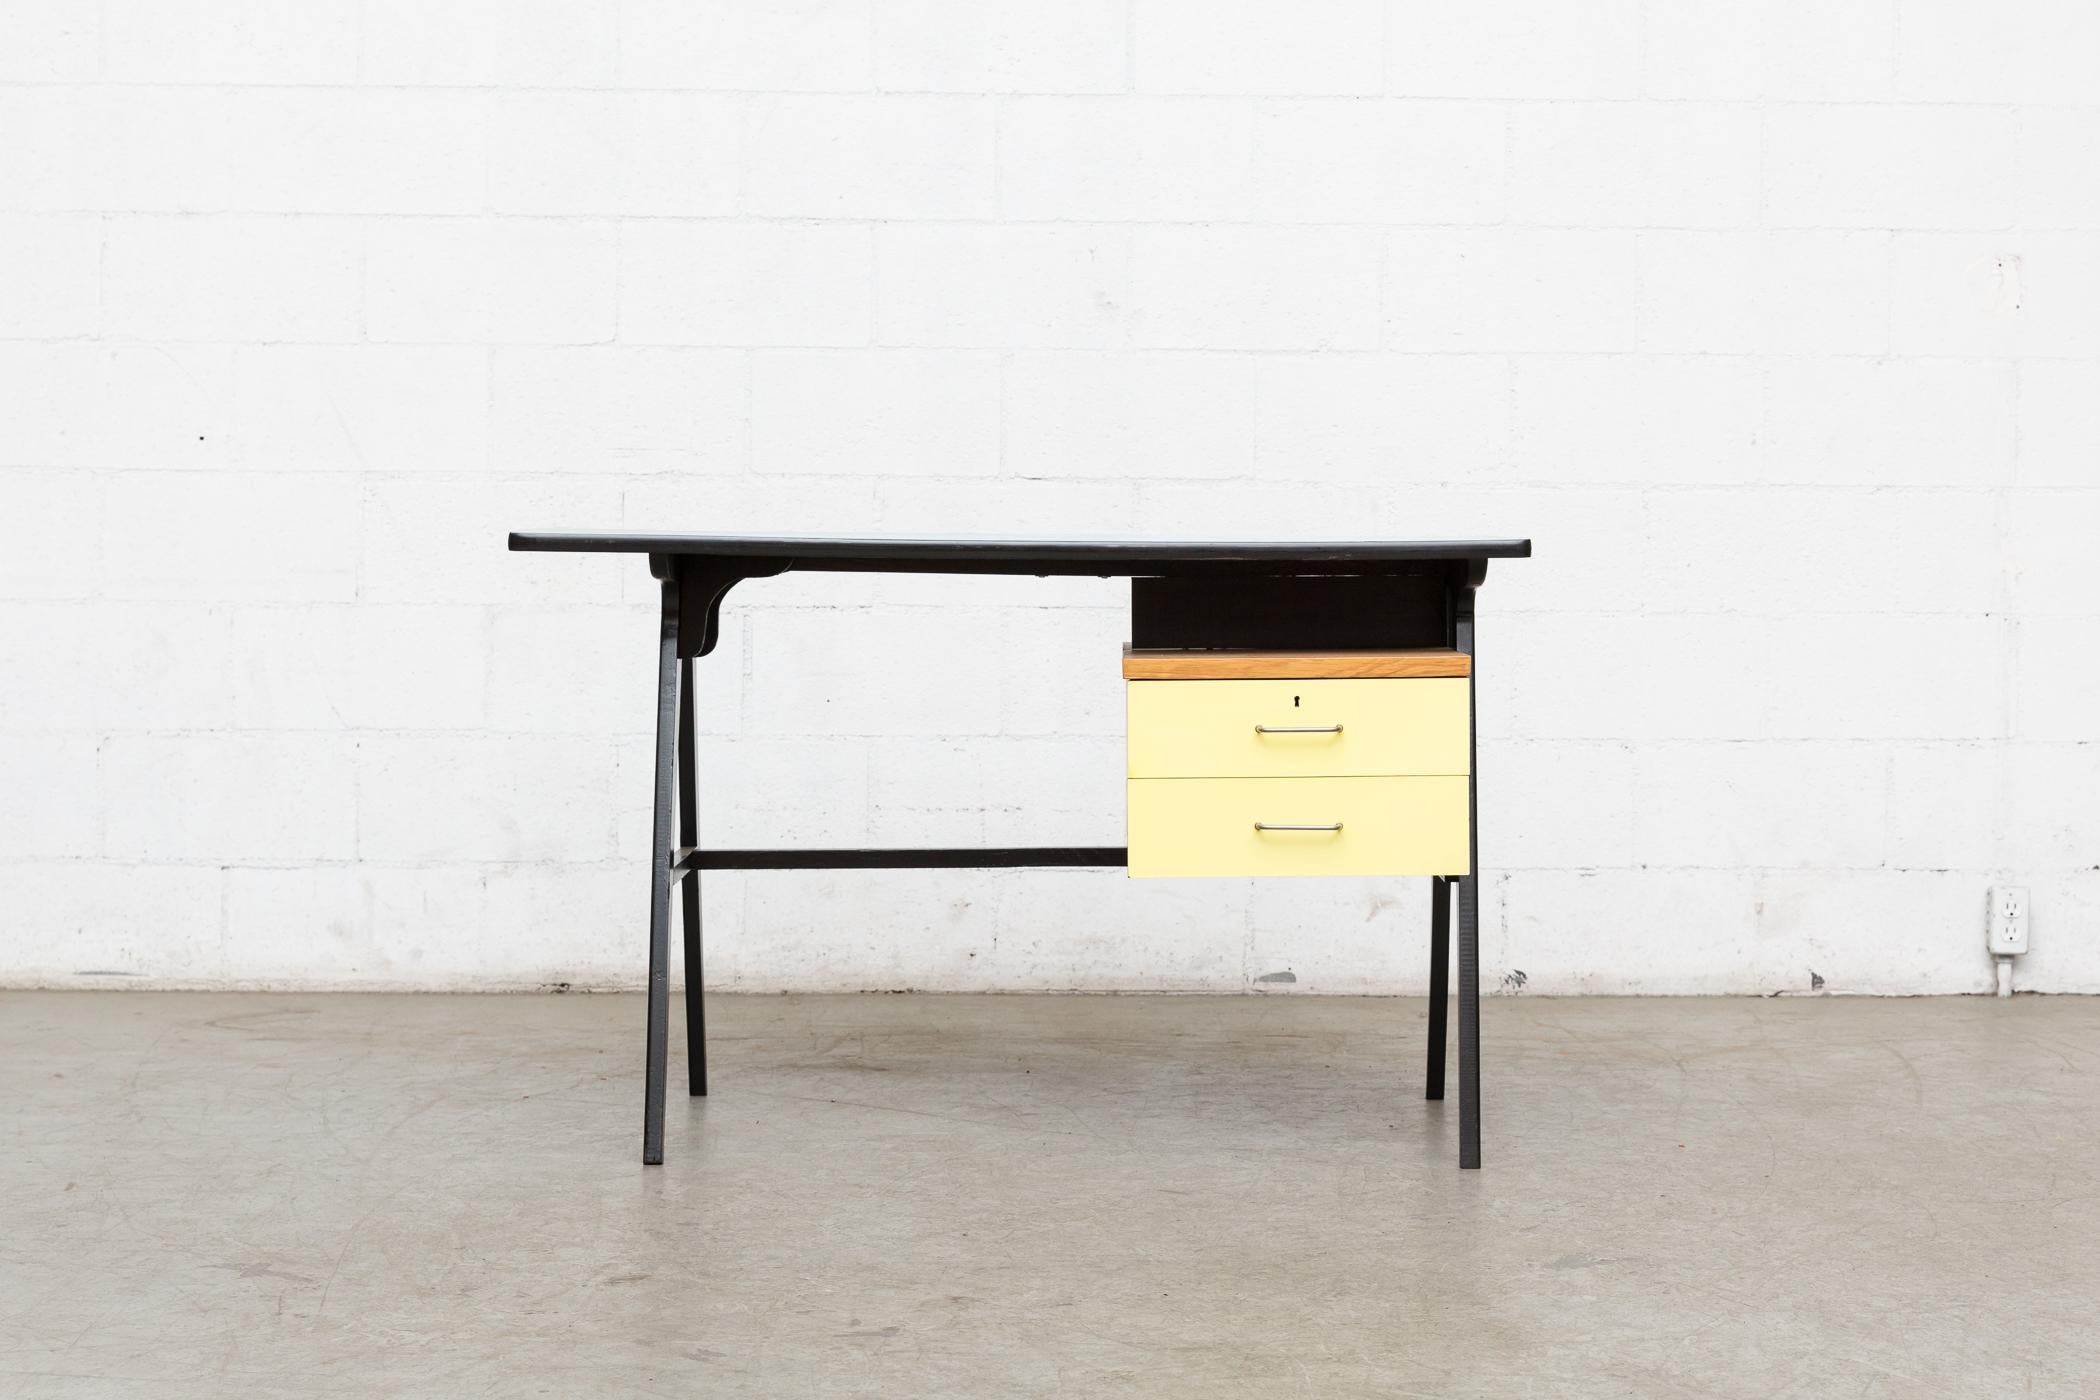 Midcentury wood writing desk with original sky blue formica top and yellow formica faced drawers with brushed chrome hand pulls. Wood frame is painted black. Original condition with visible wear. and Patina.